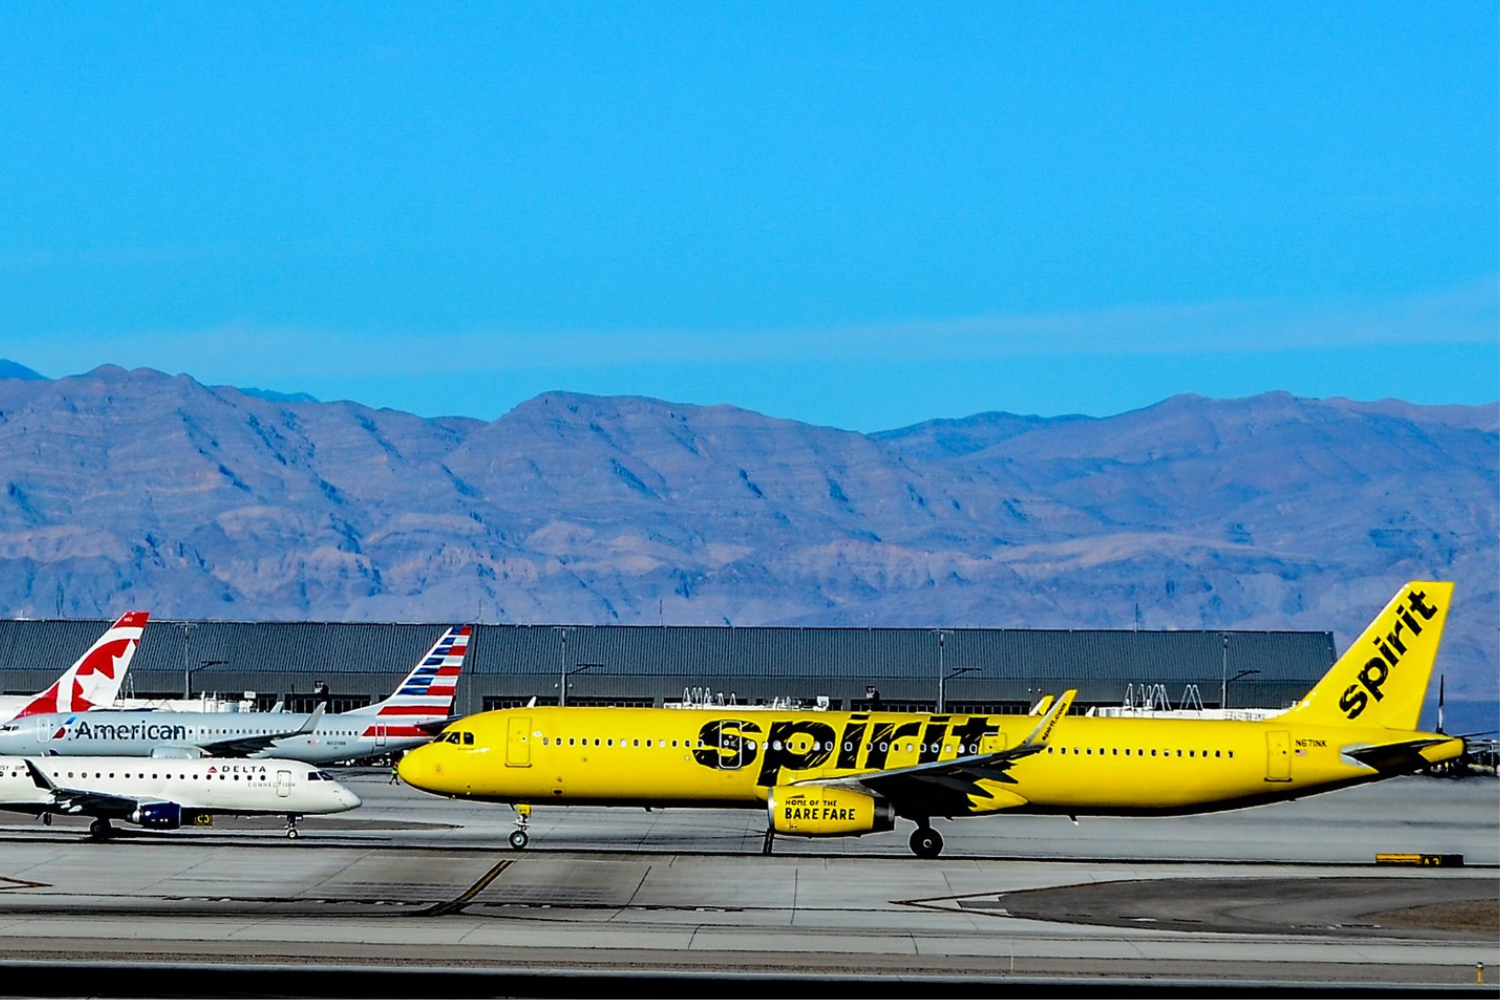 a yellow spirit flight and a white american airlines flight at an airport: why are spirit and frontier so cheap